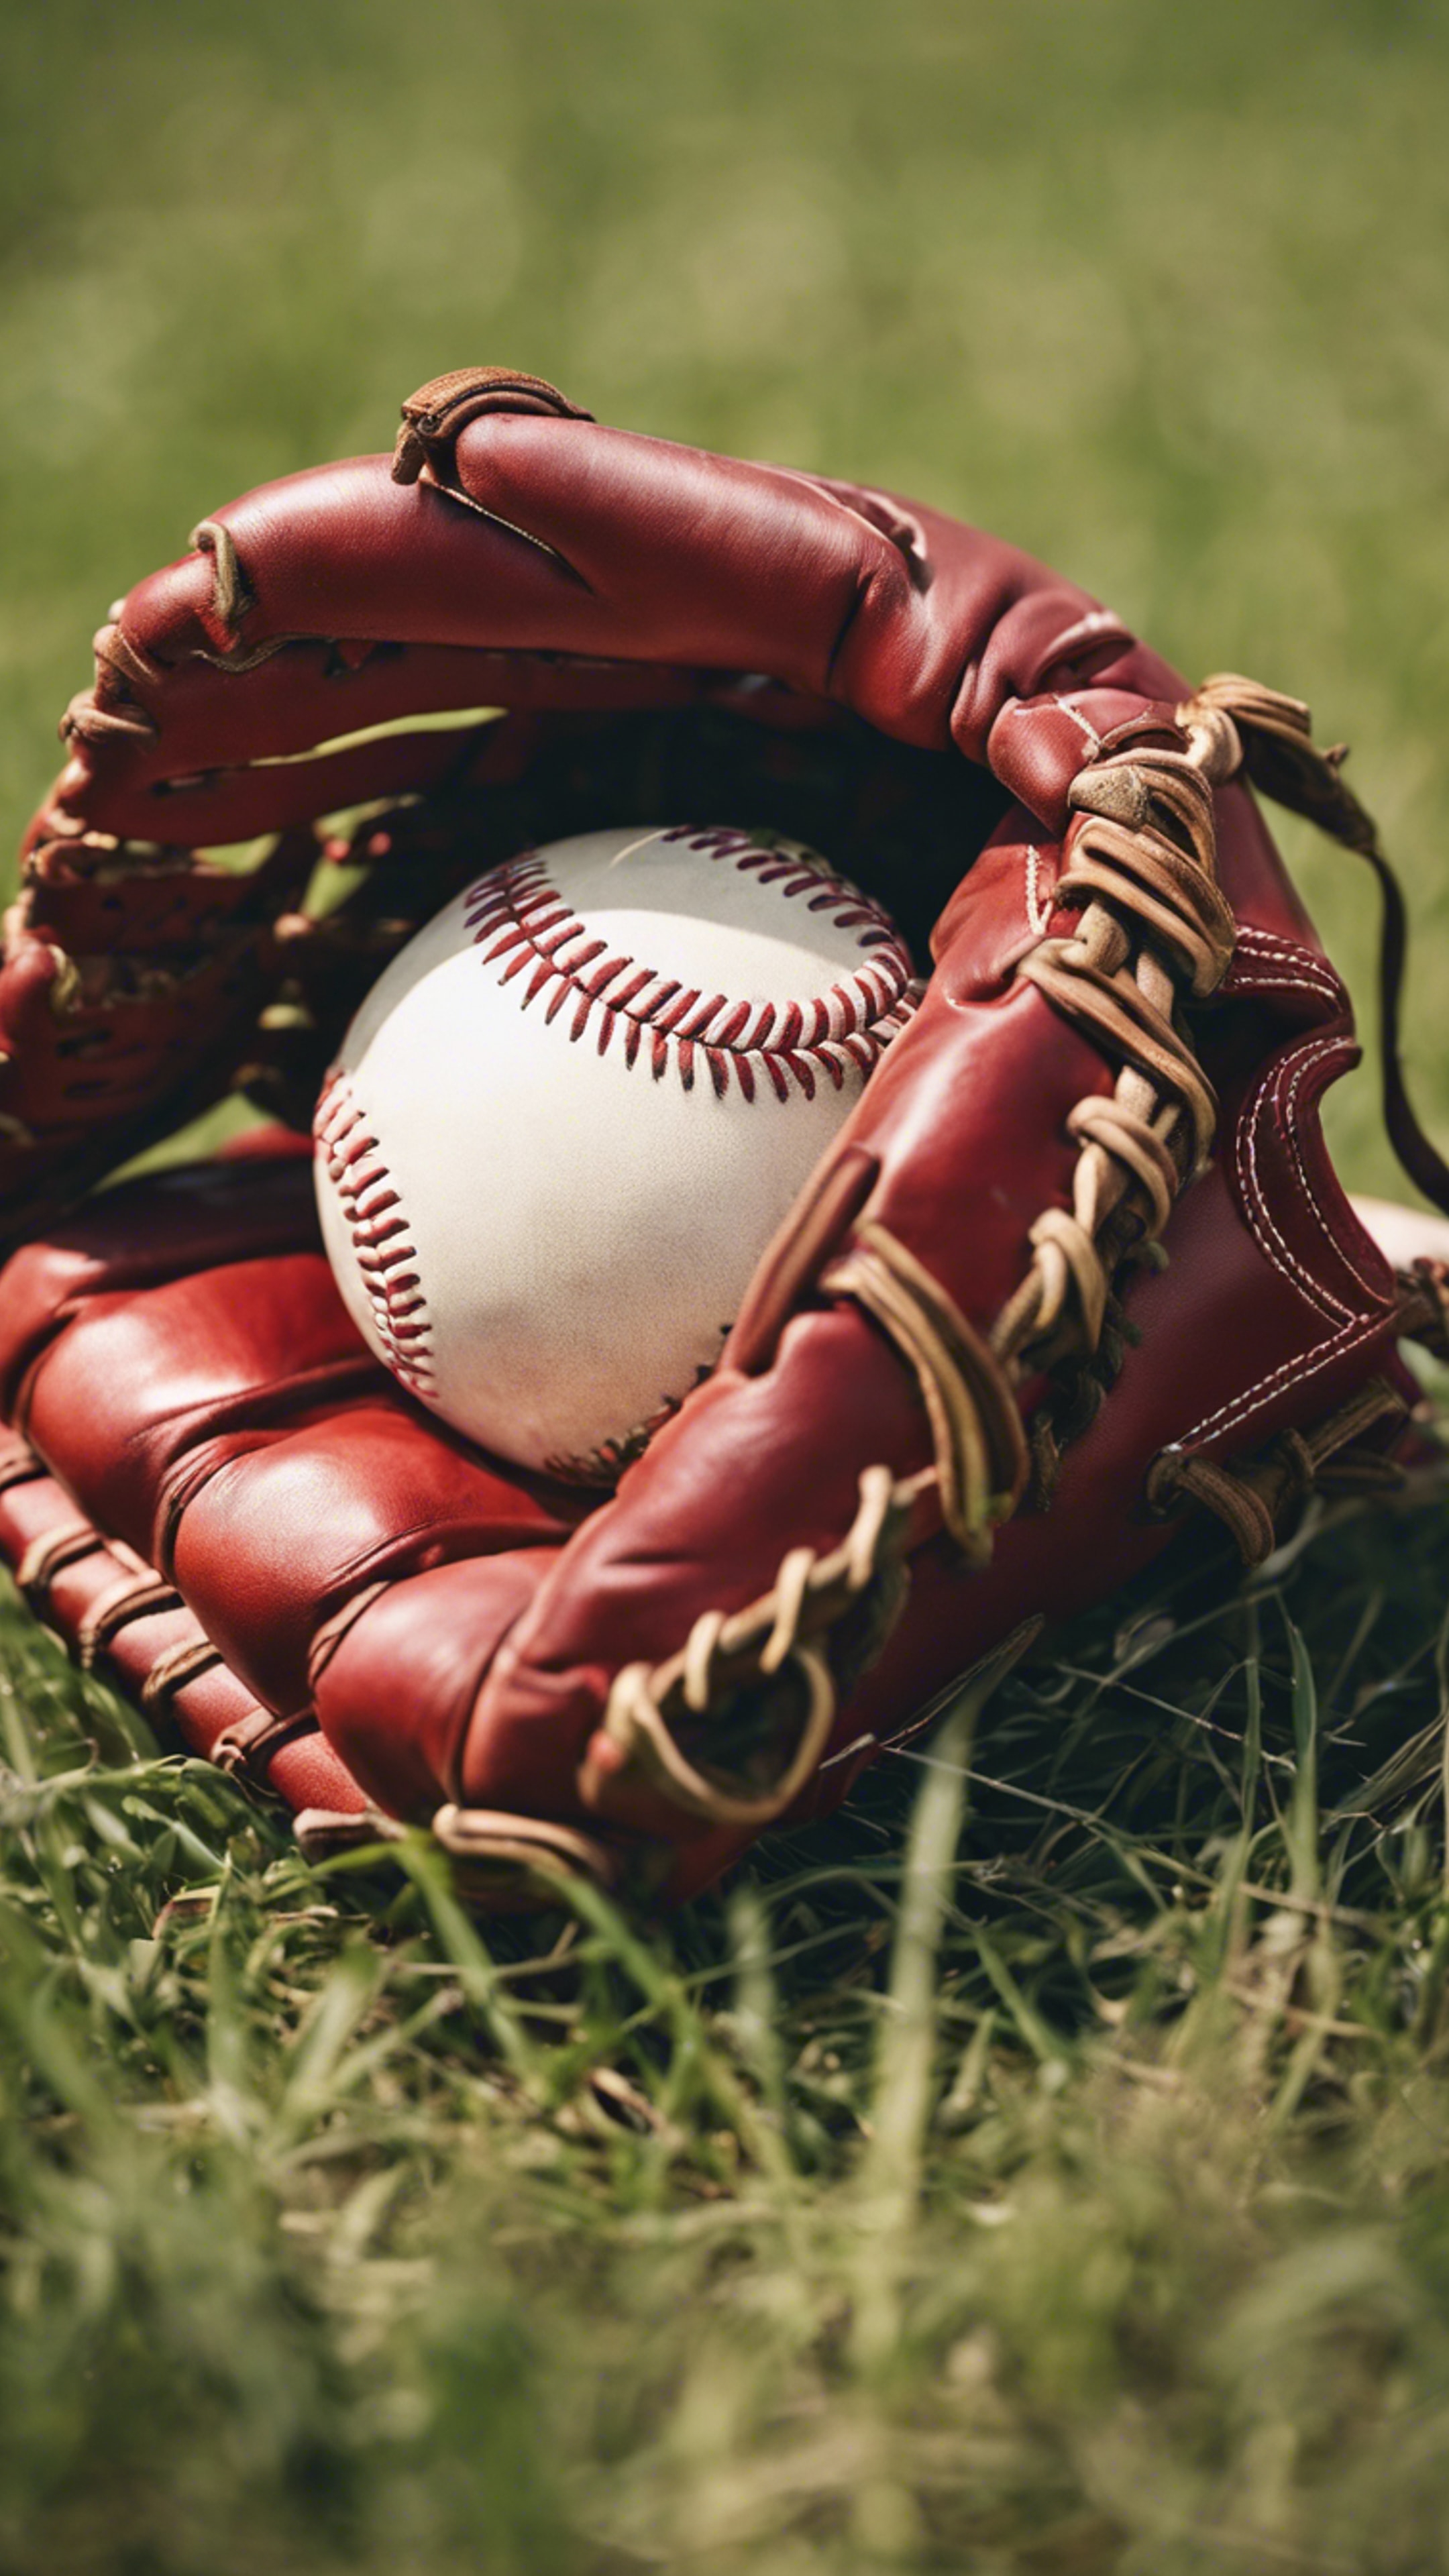 A striking red leather baseball glove on a grassy field right after a game. Ფონი[10102f7c198241d6b5bd]